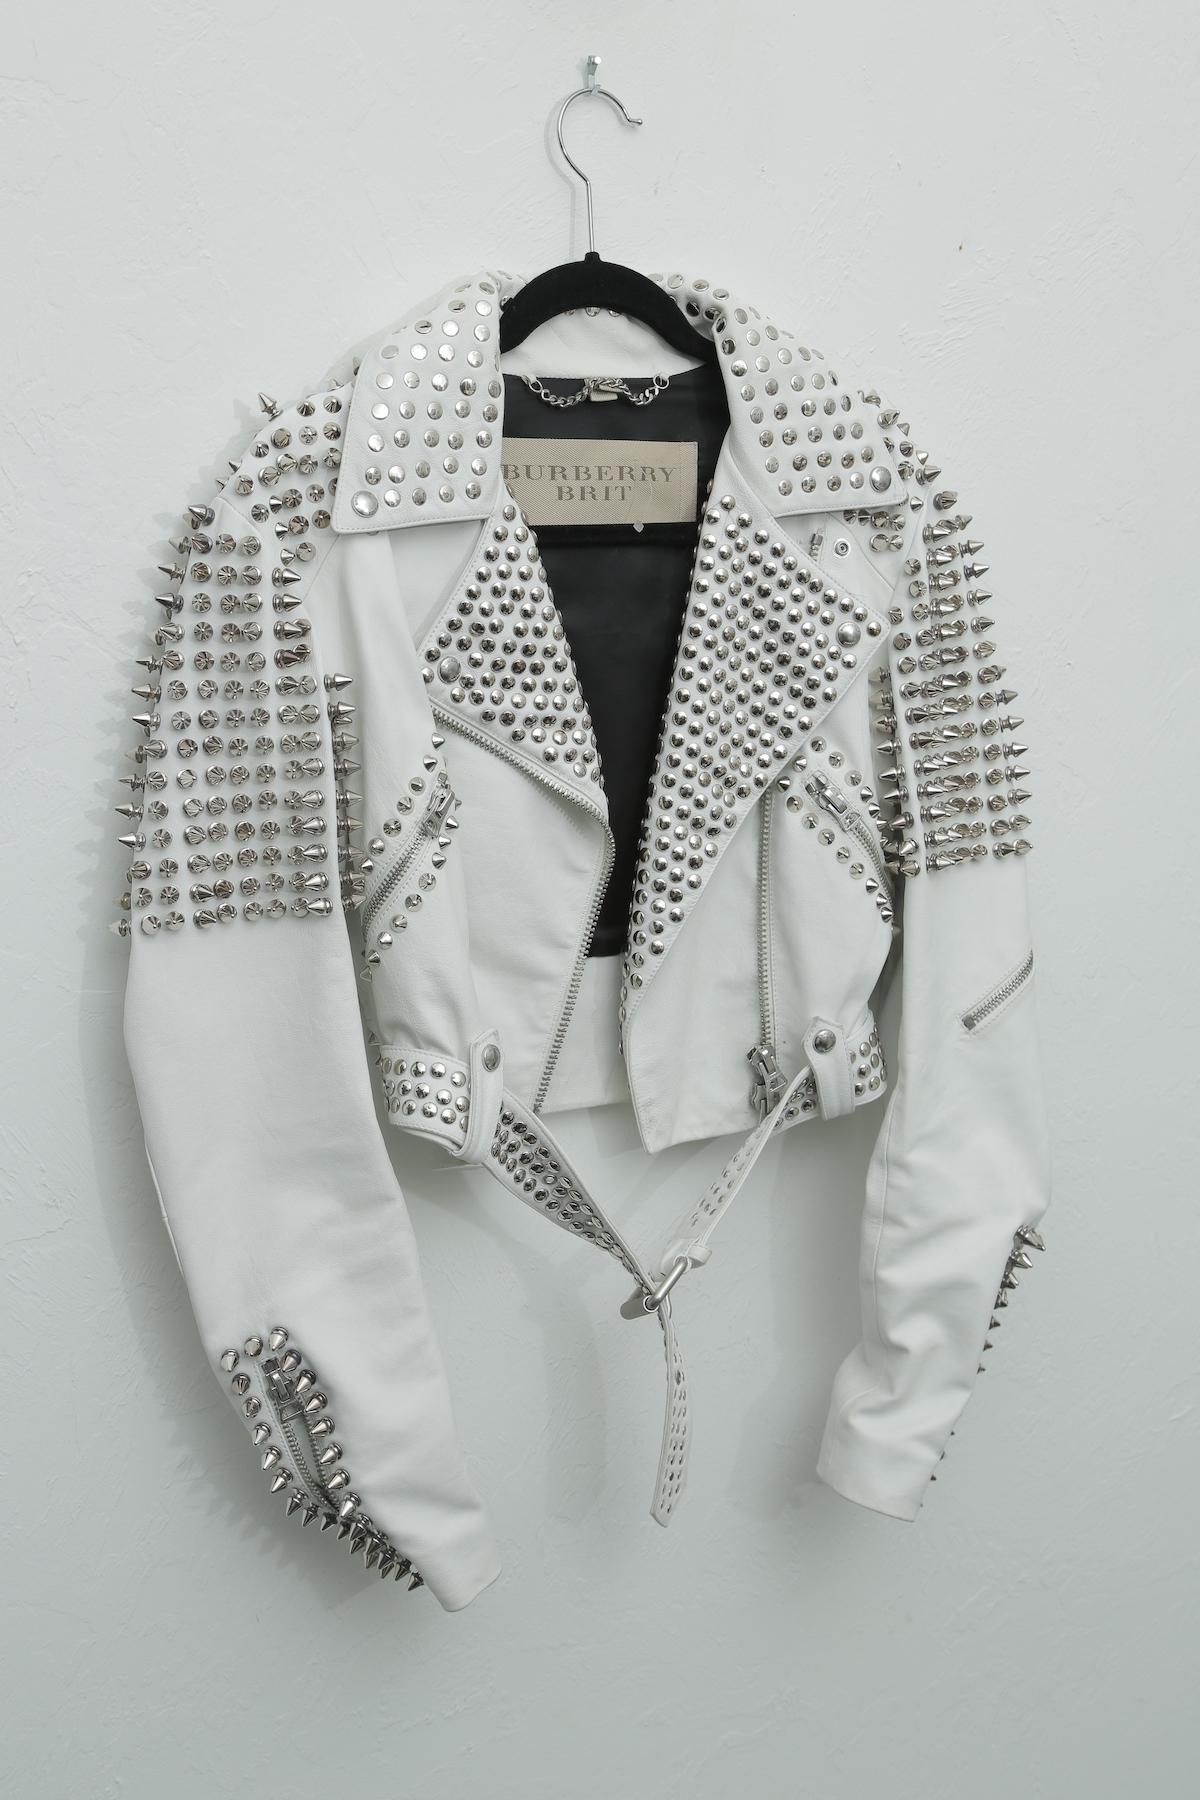 Burberry White Leather Jacket  with Silver Studs 2015. USA 6 UK 4 ITA 40